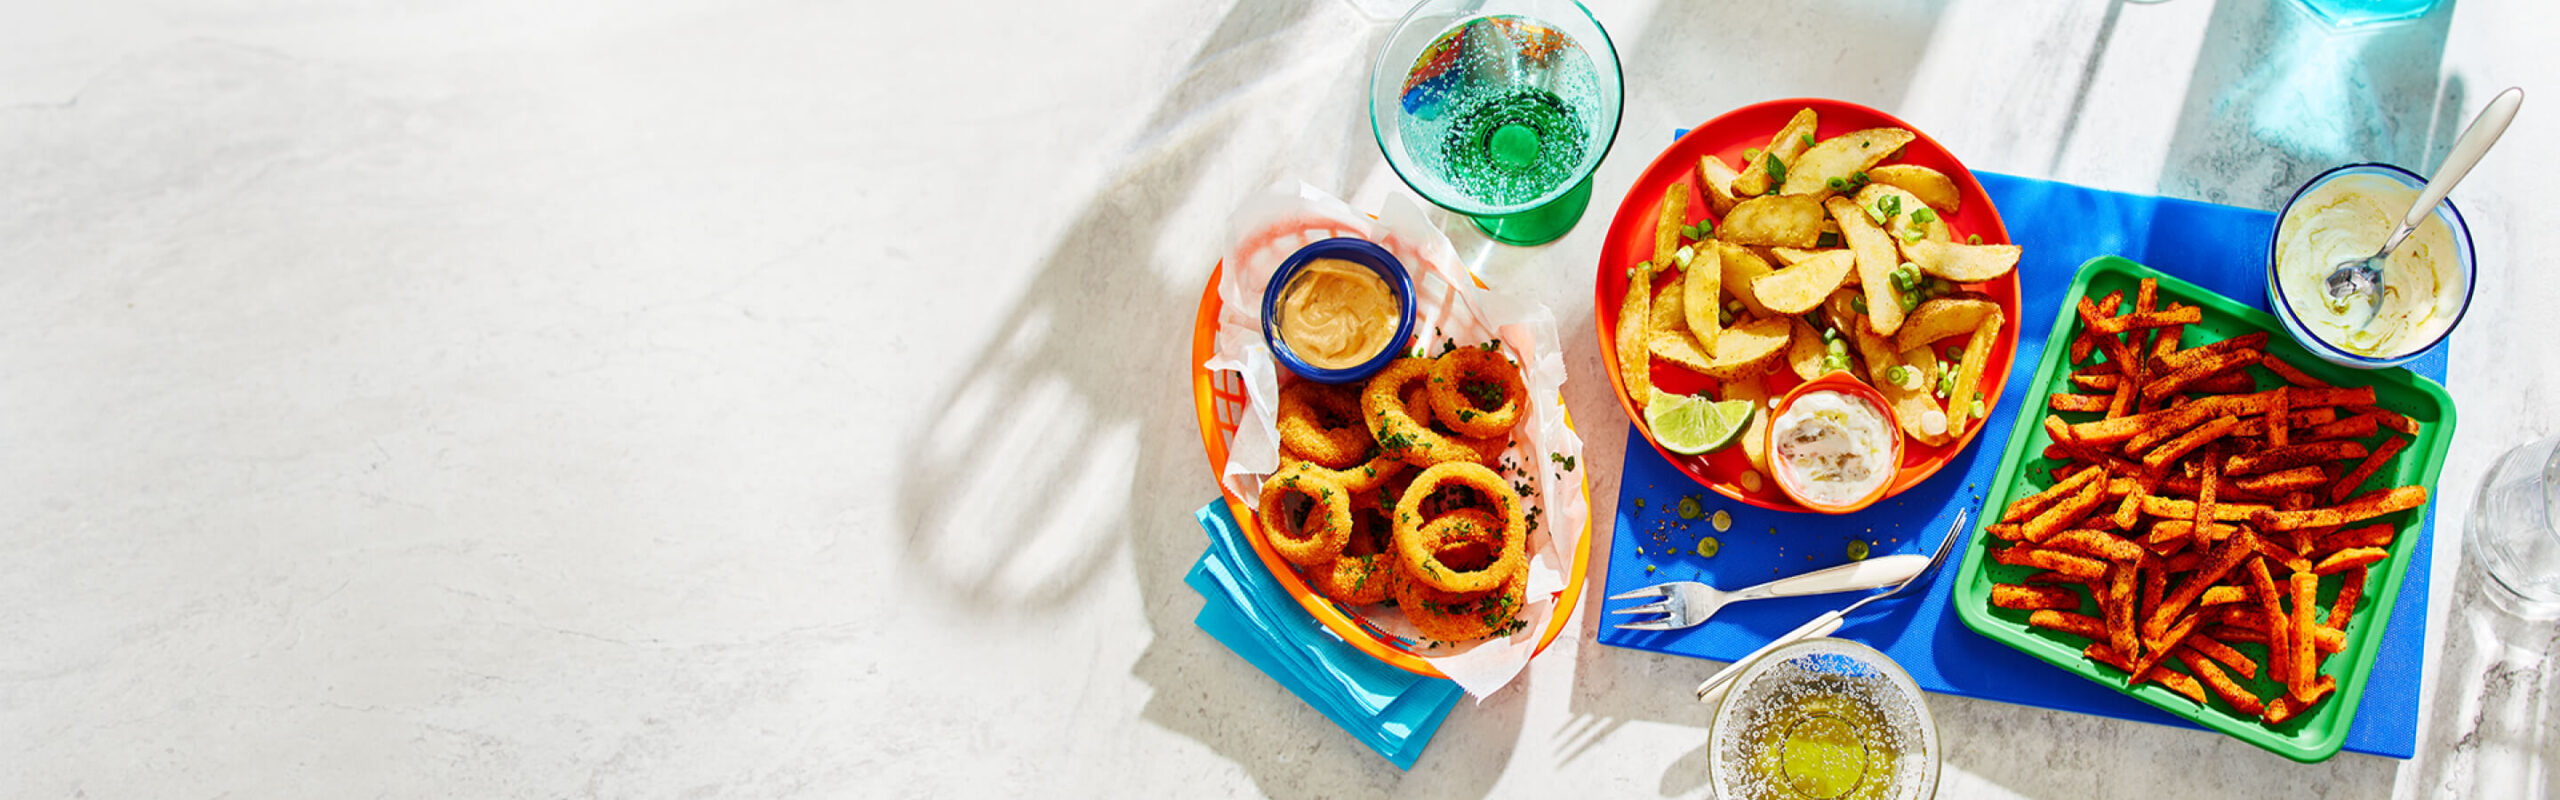 Sweet potato fries, Mexican-inspired fries and onion rings on a white backdrop